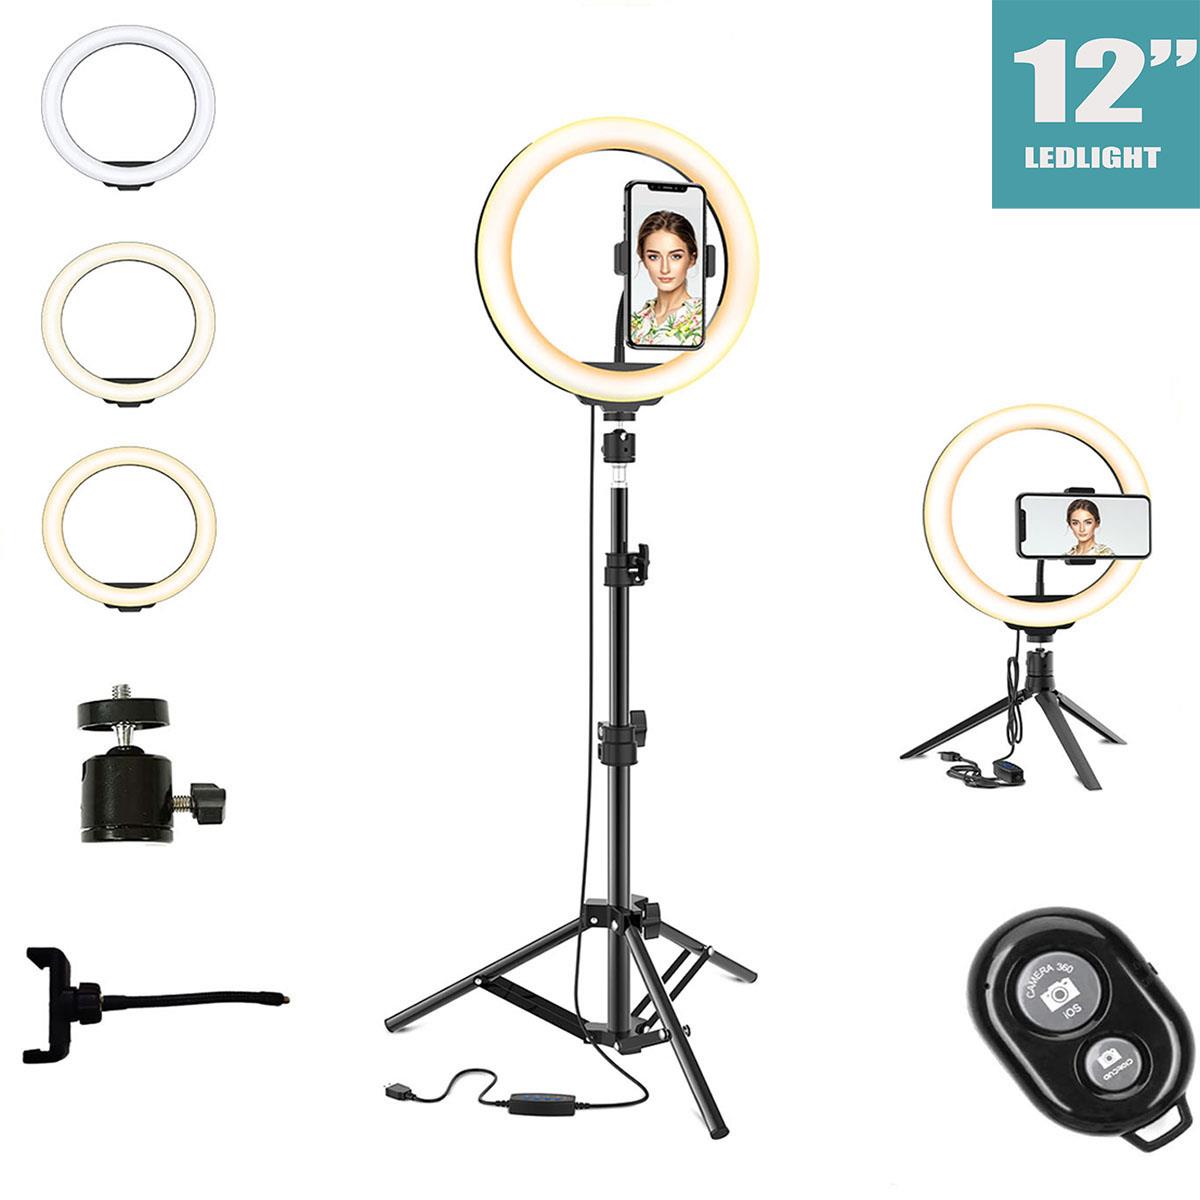 12'' LED Selfie Ring Light with 3 Light Modes, 10 Brightness Levels, Bluetooth Remote Control